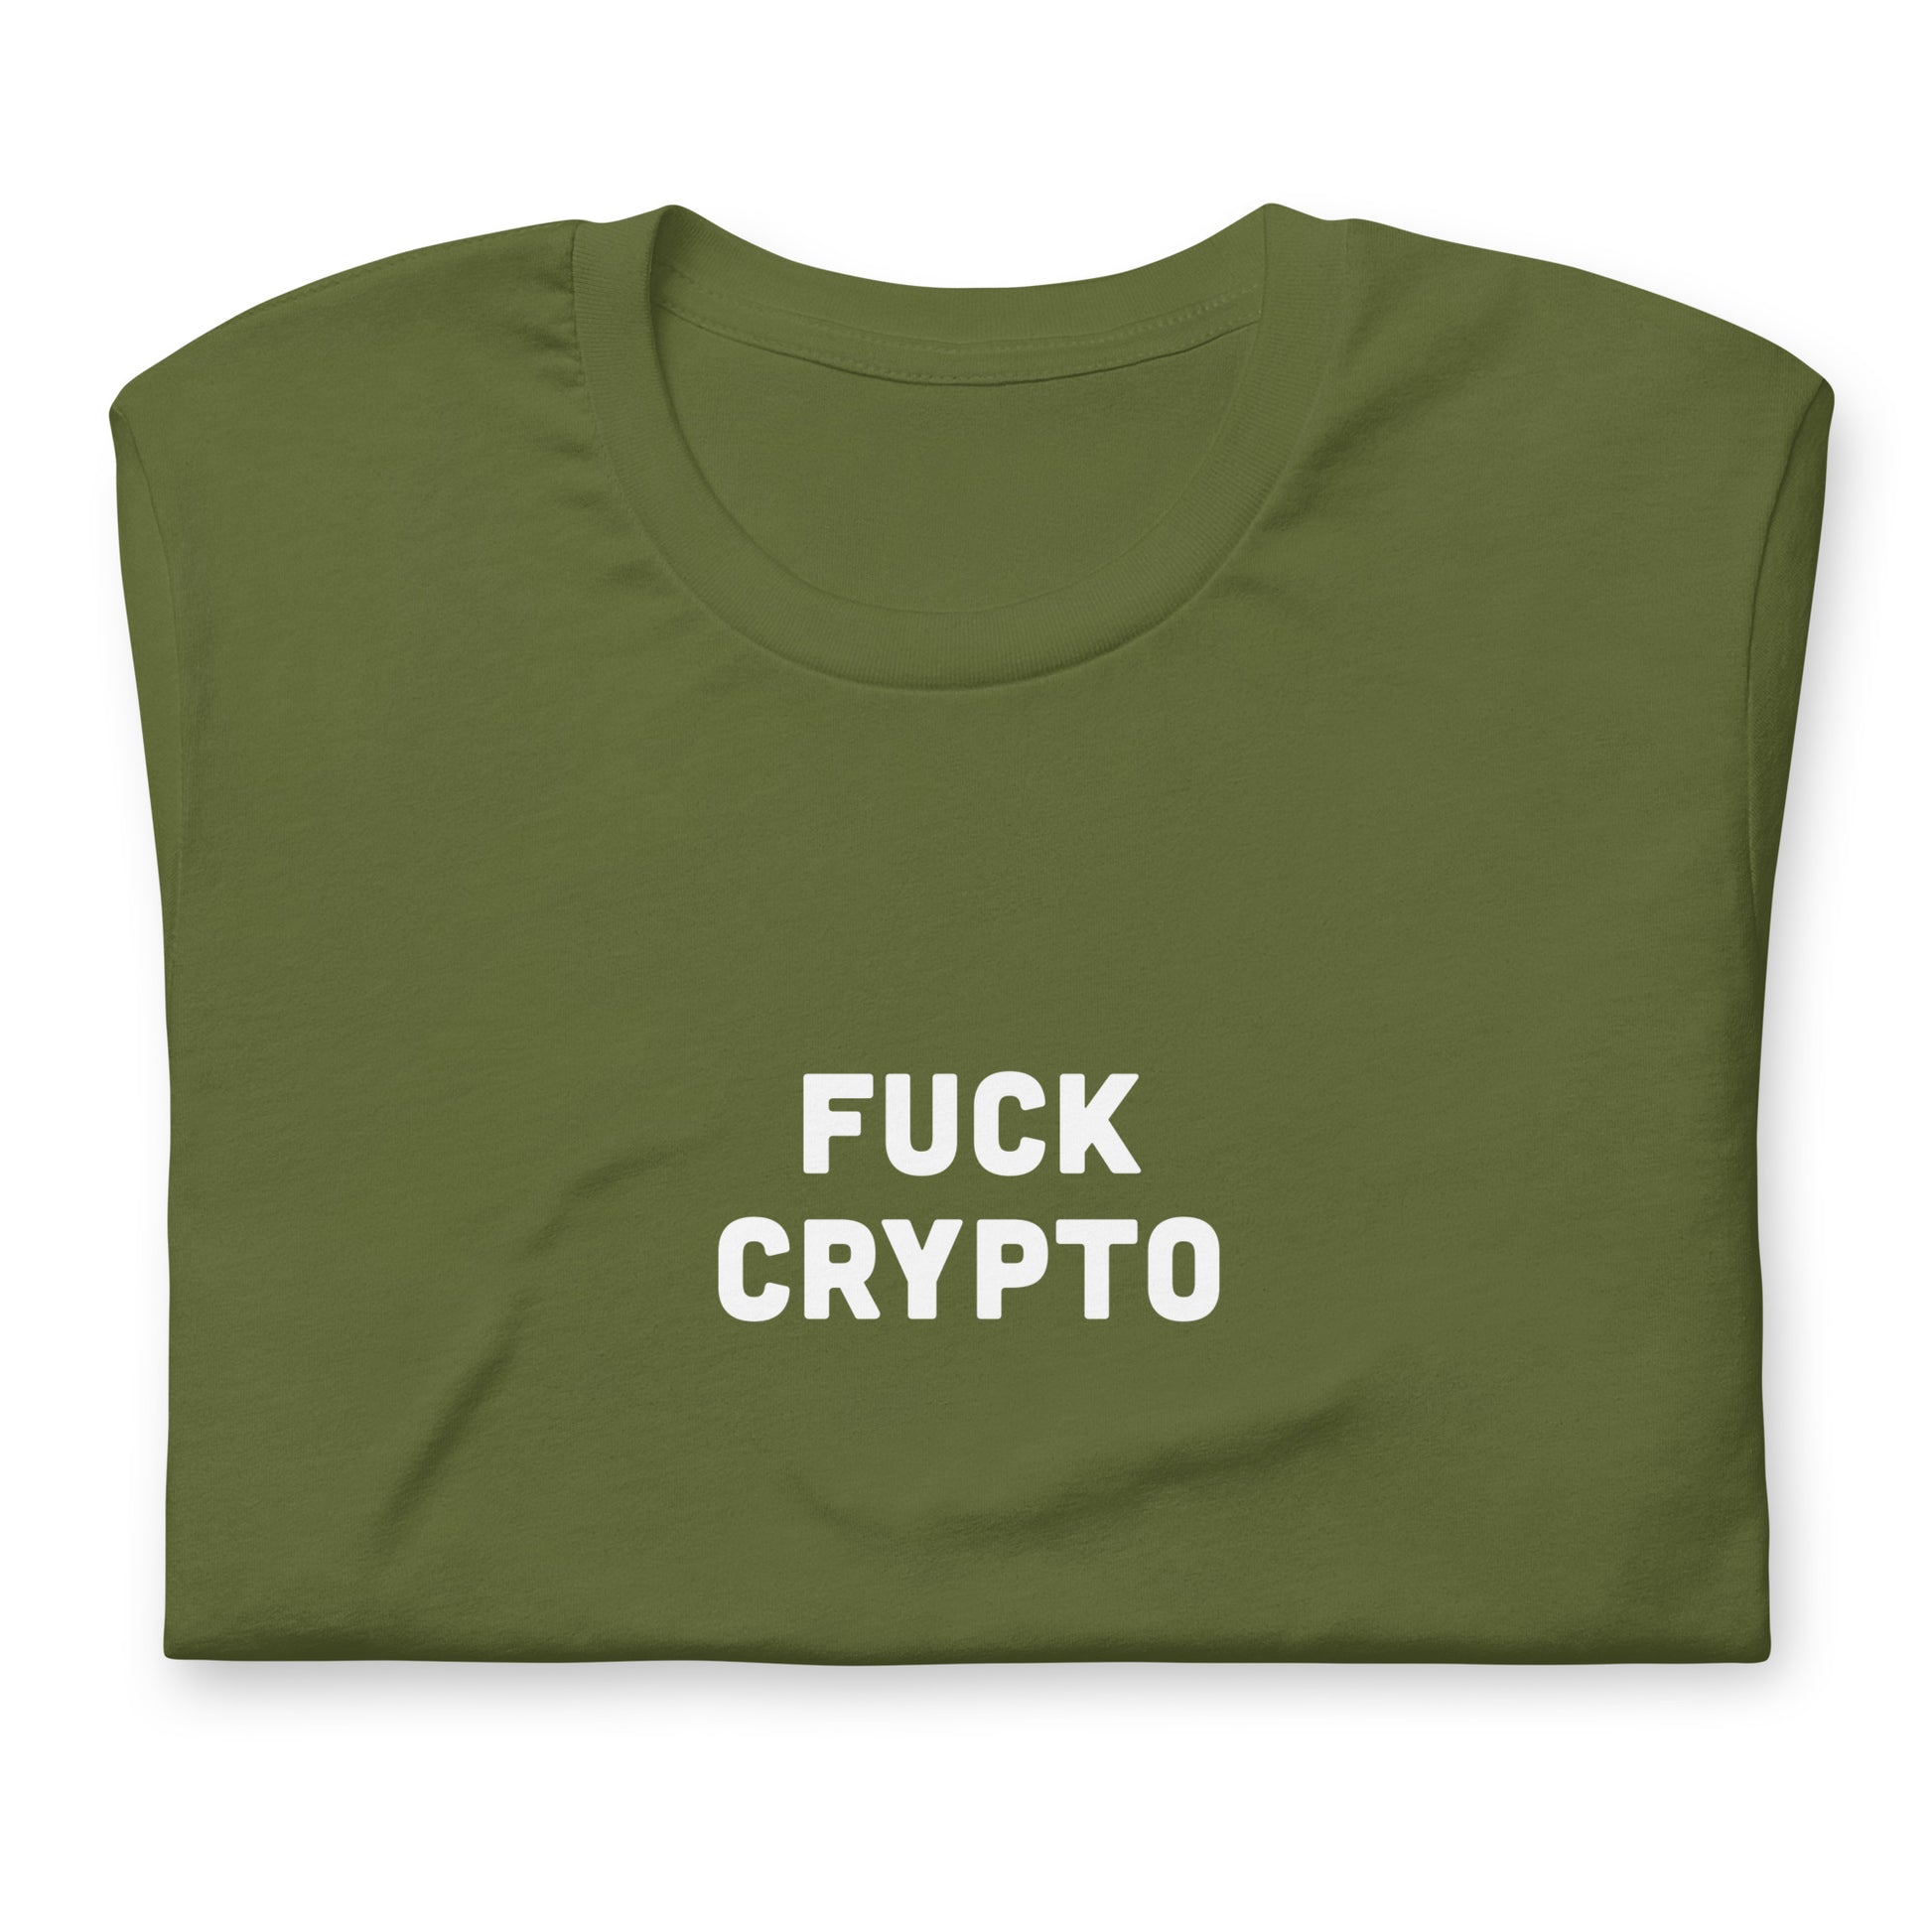 Fuck Crypto T-Shirt Size S Color Navy